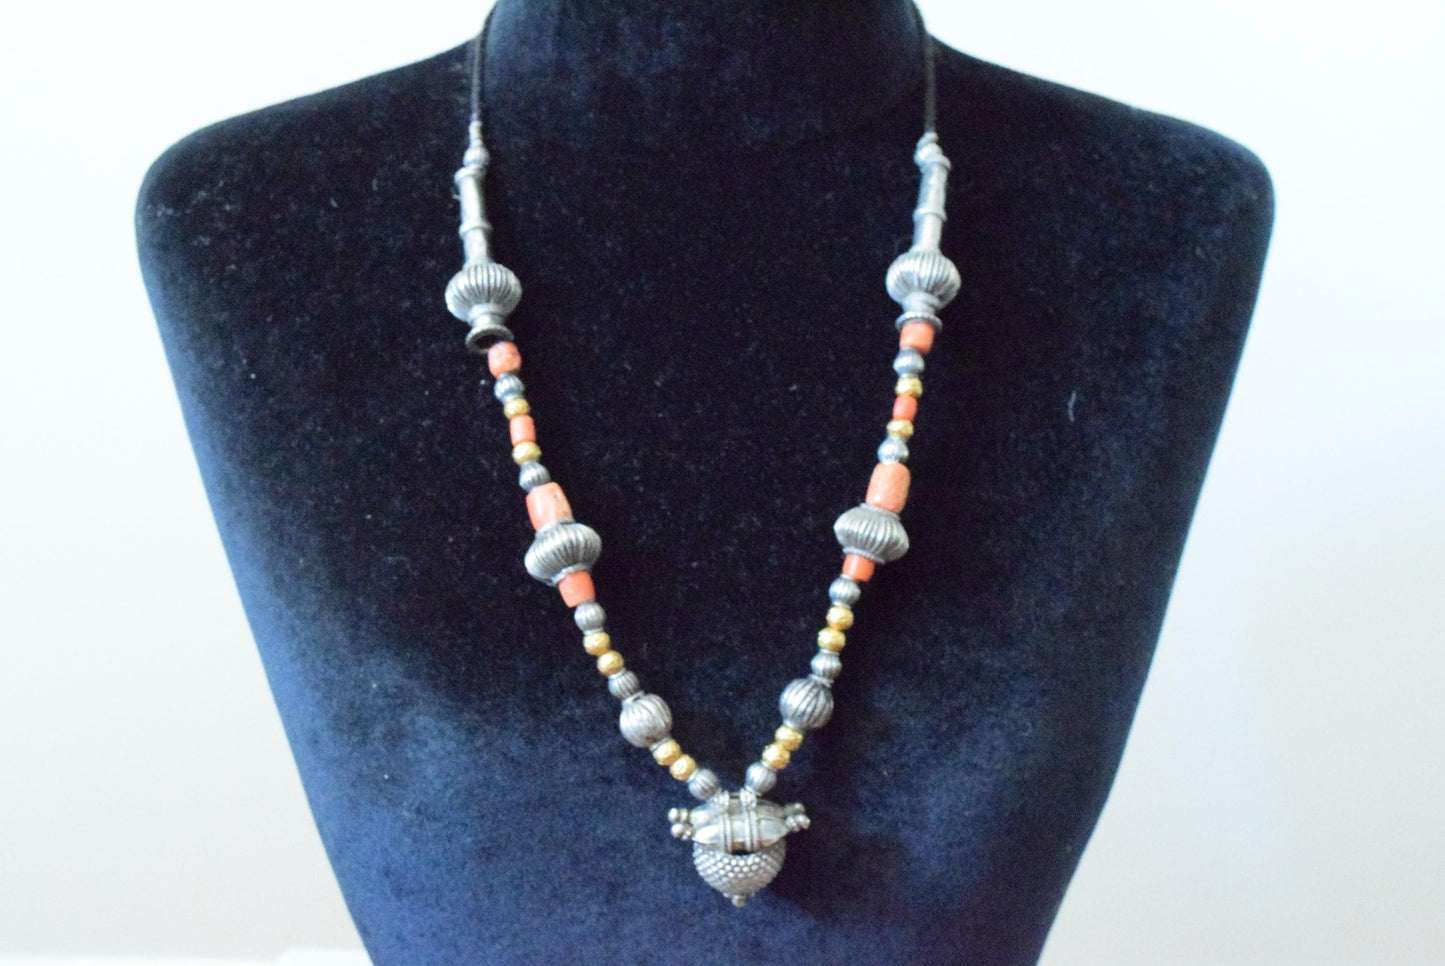 Silver and Coral Necklace with Vintage Amulet - Anteeka